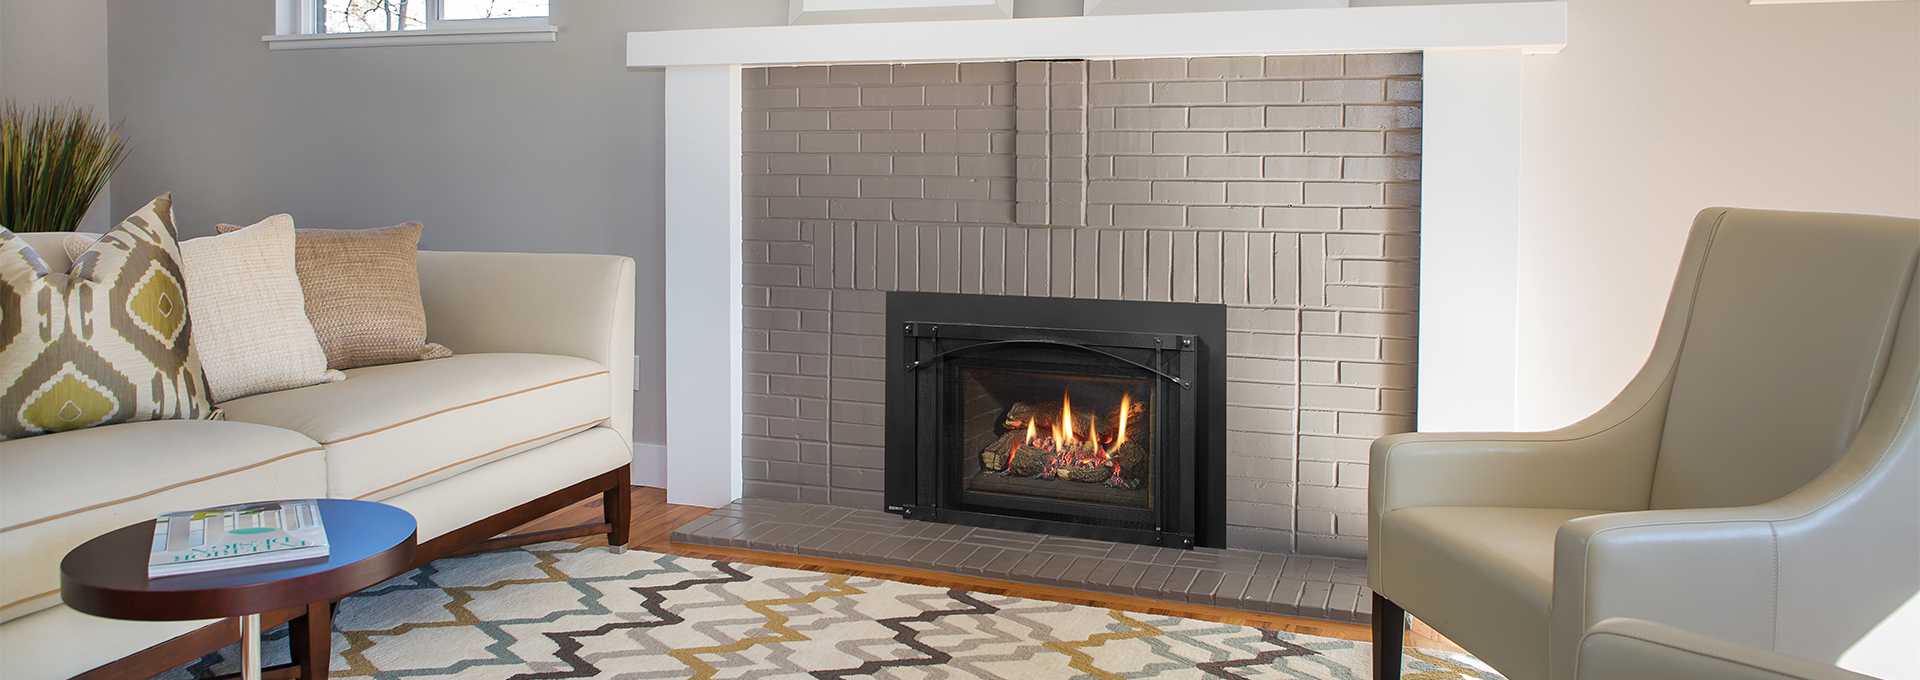 Upgrade To A Gas Fireplace Insert, Sealing Around A Gas Fireplace Insert